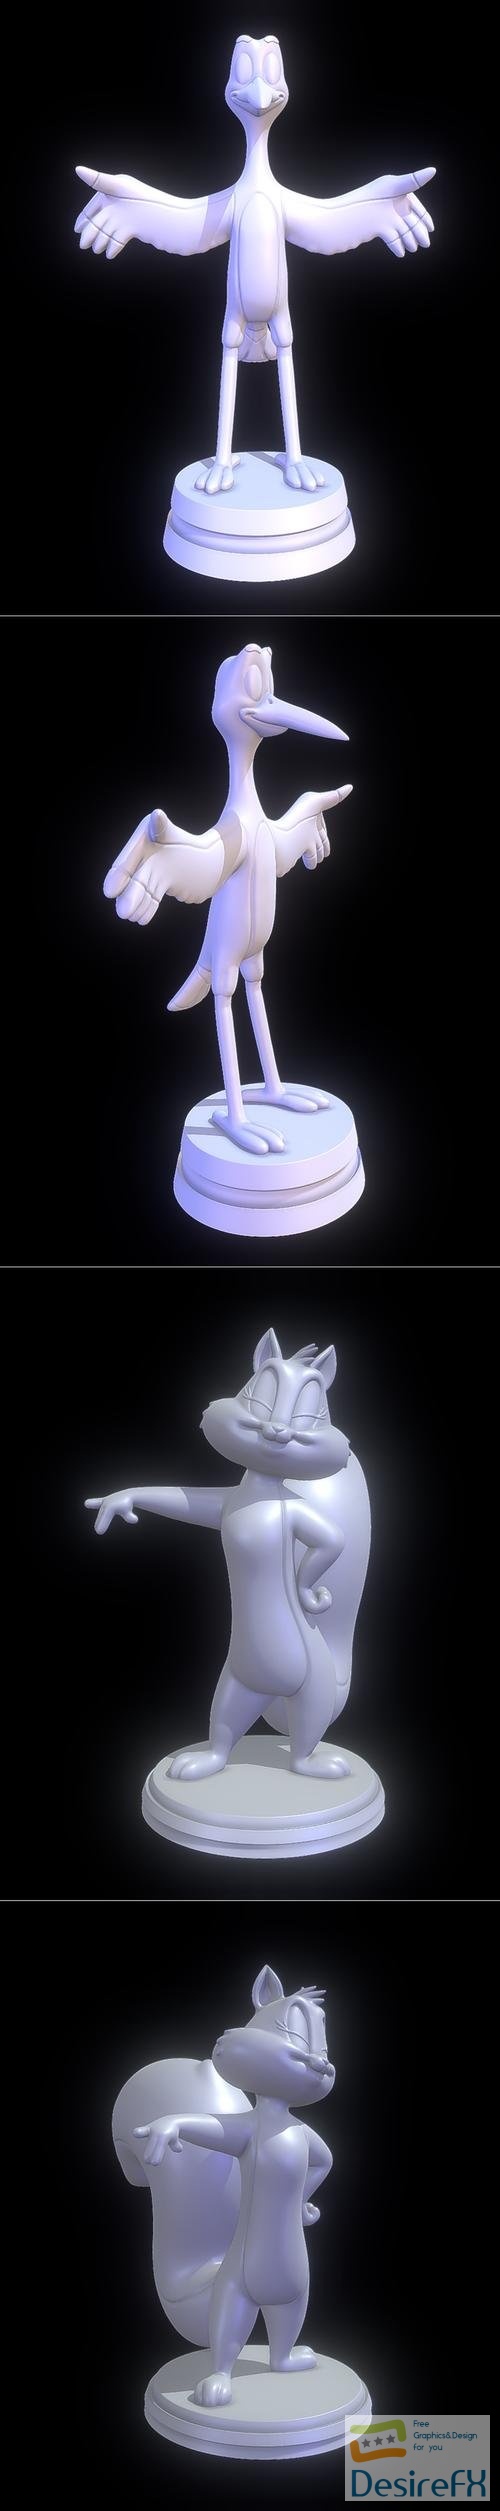 Whizzer - The Swan Princess and Penelope Pussycat - Looney Tunes – 3D Print